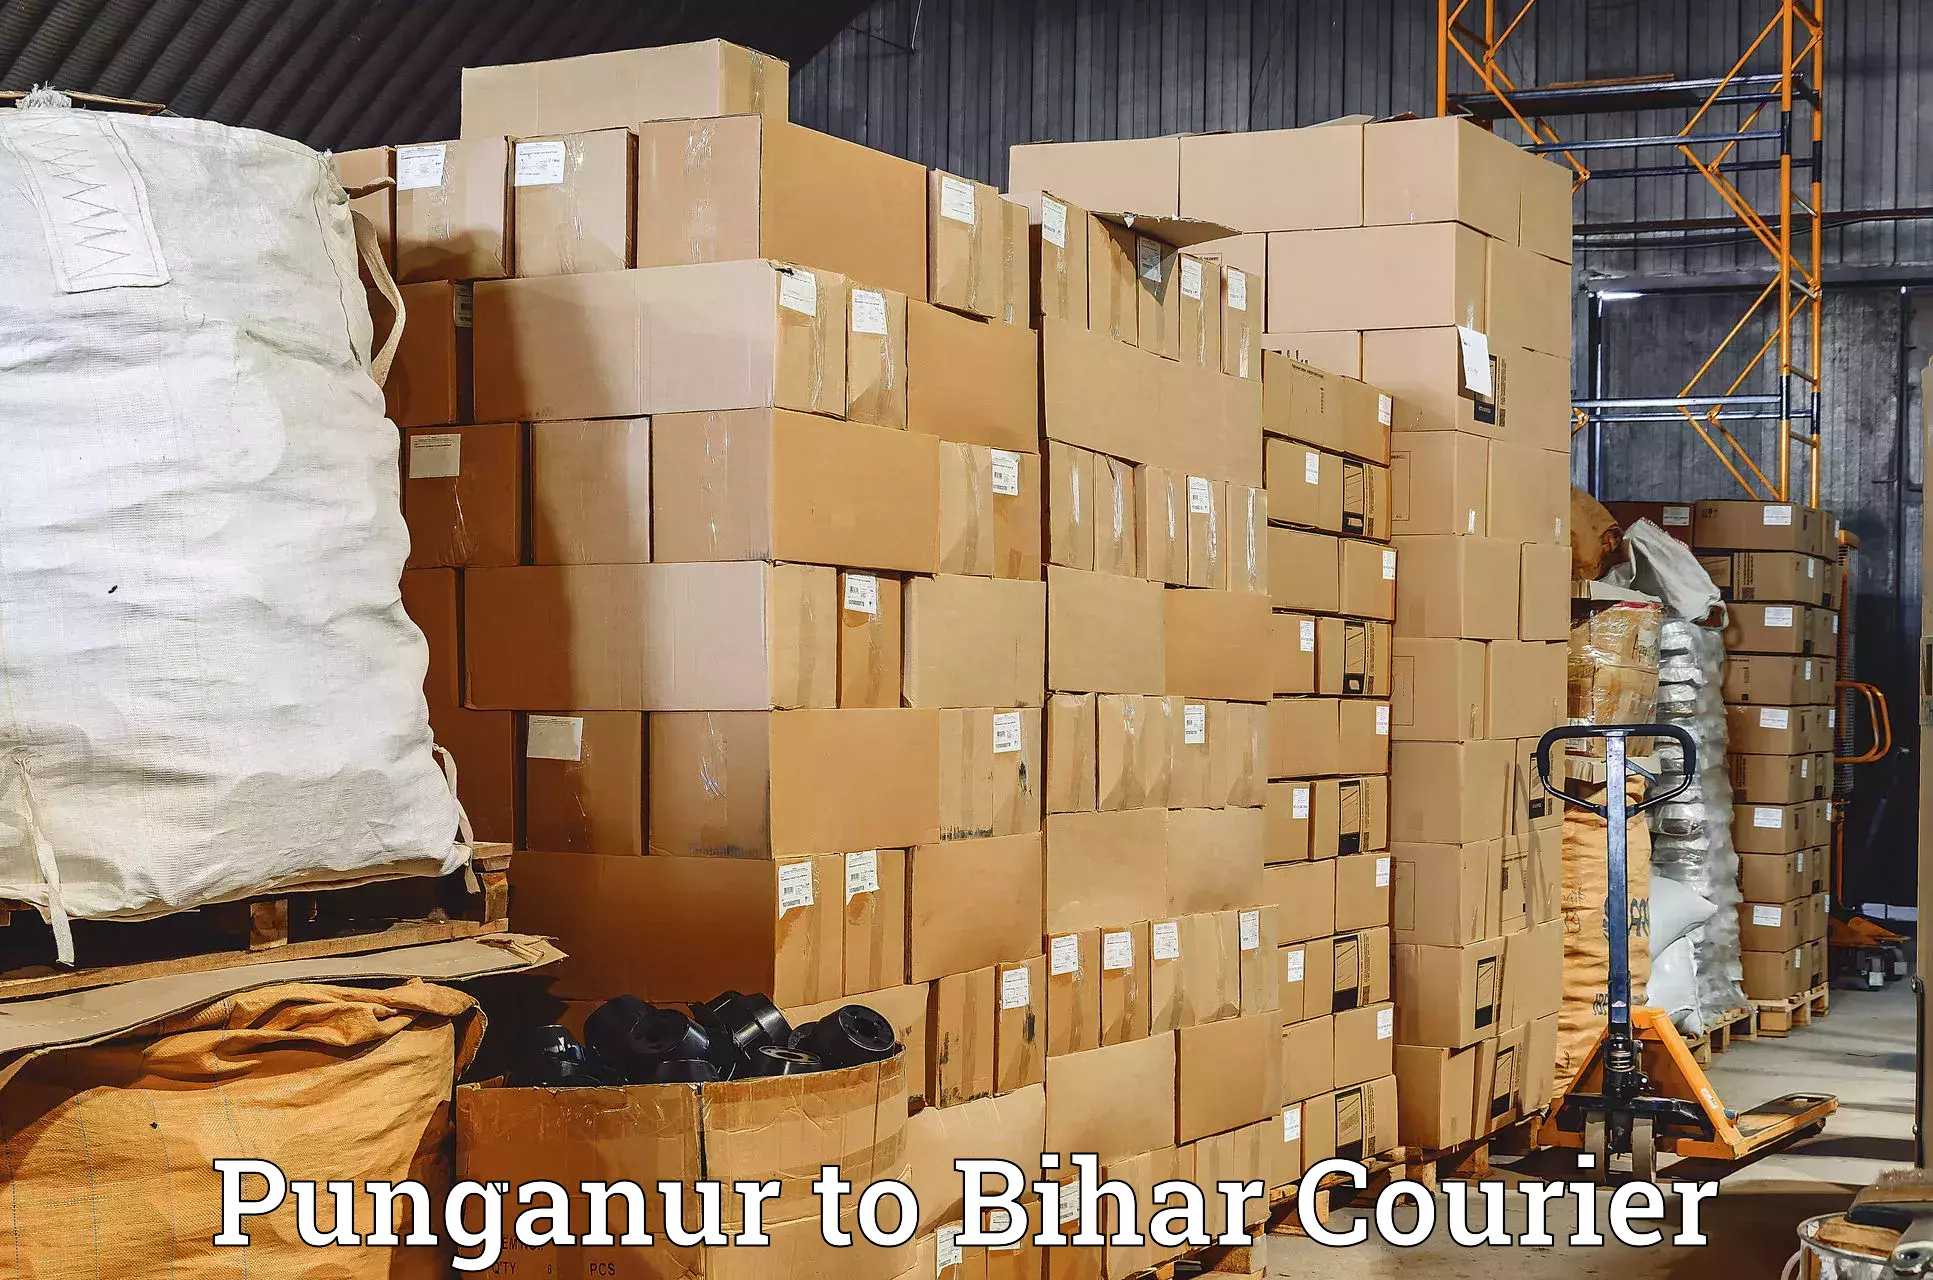 Courier service comparison in Punganur to Nawada